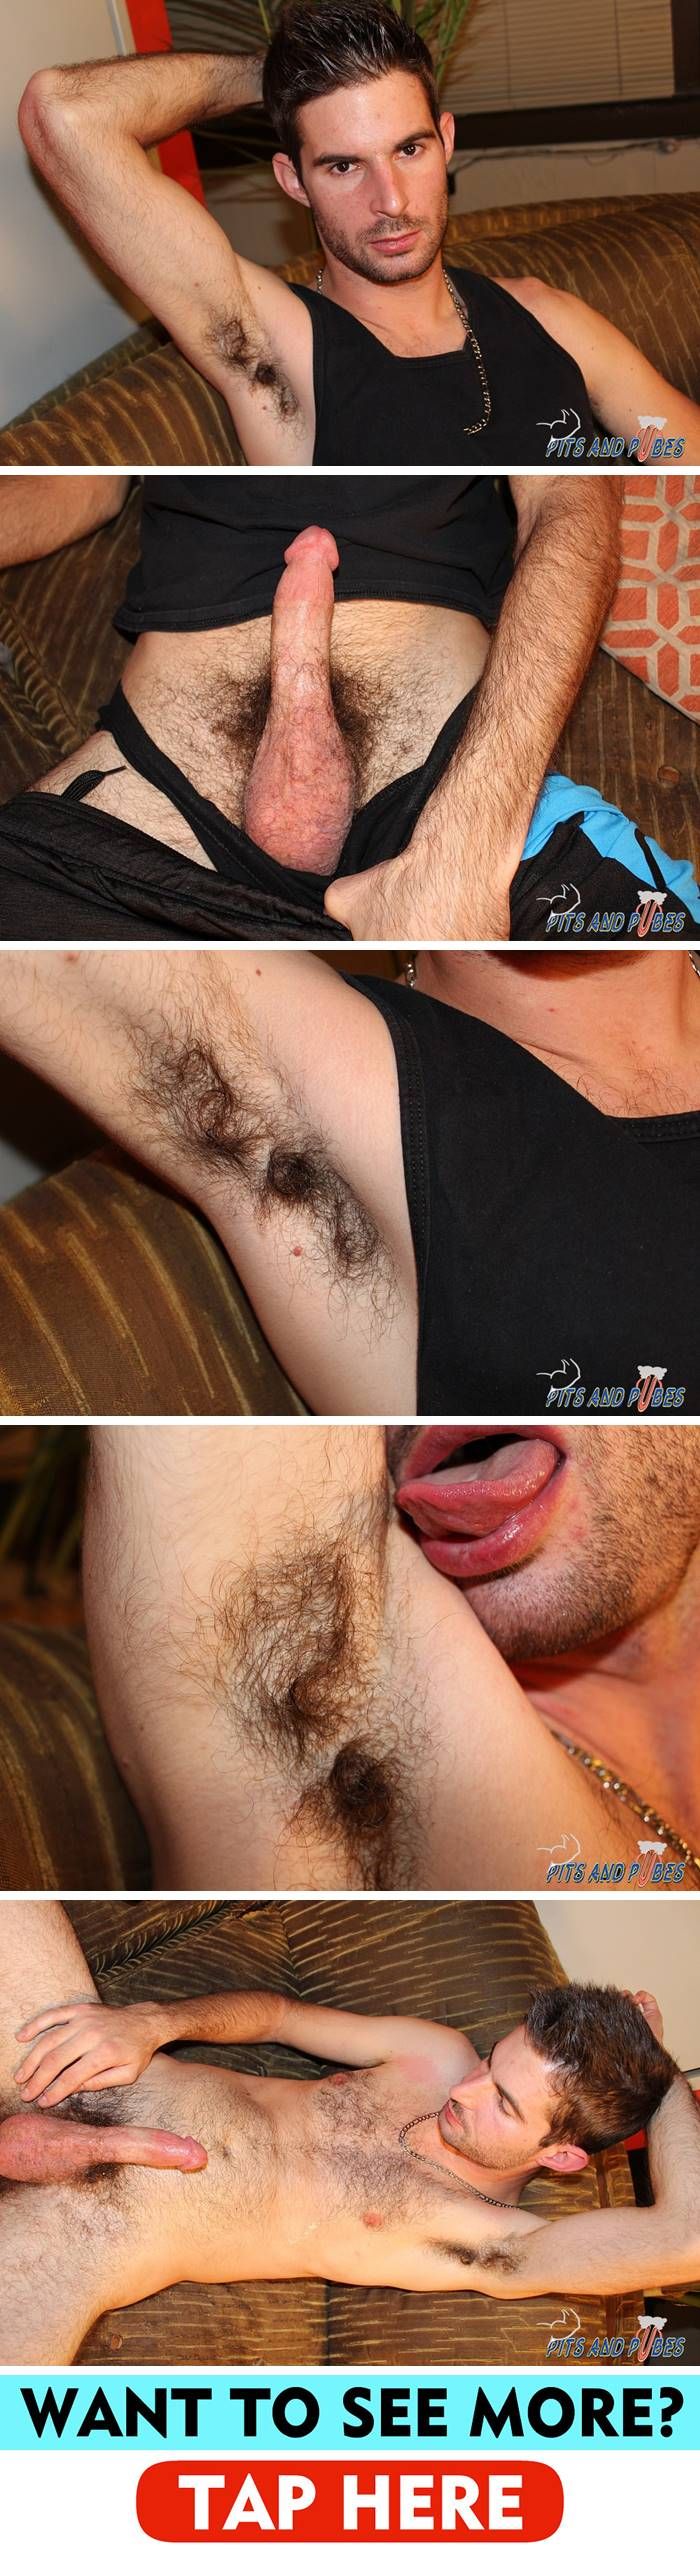 Pits & Pubes: Dempsey Stearns 1